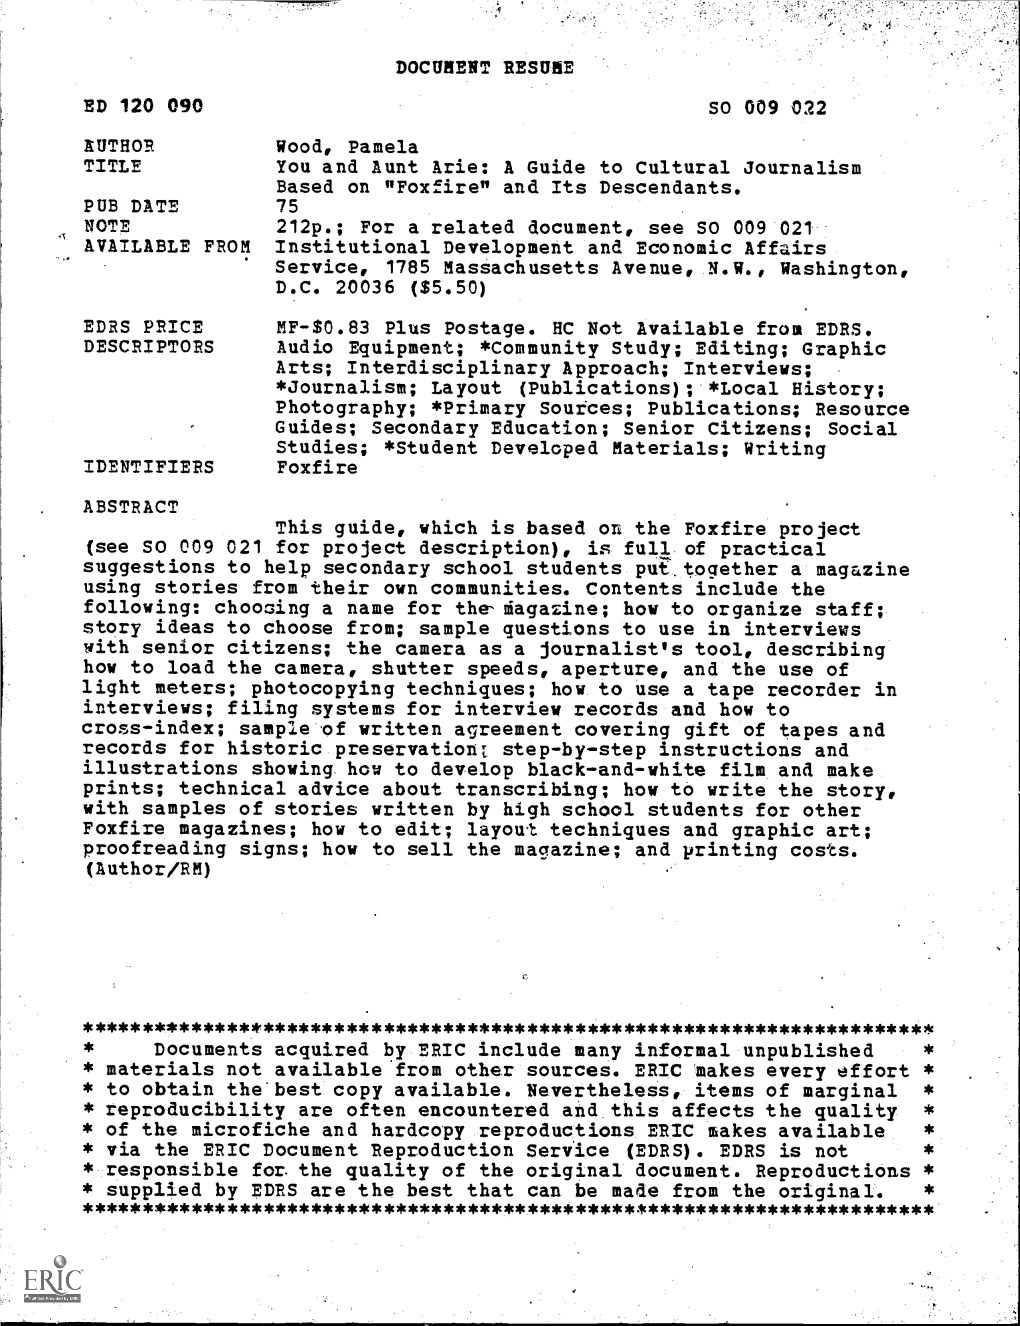 Sample of Written Agreement Covering Gift of Tapes and Documents